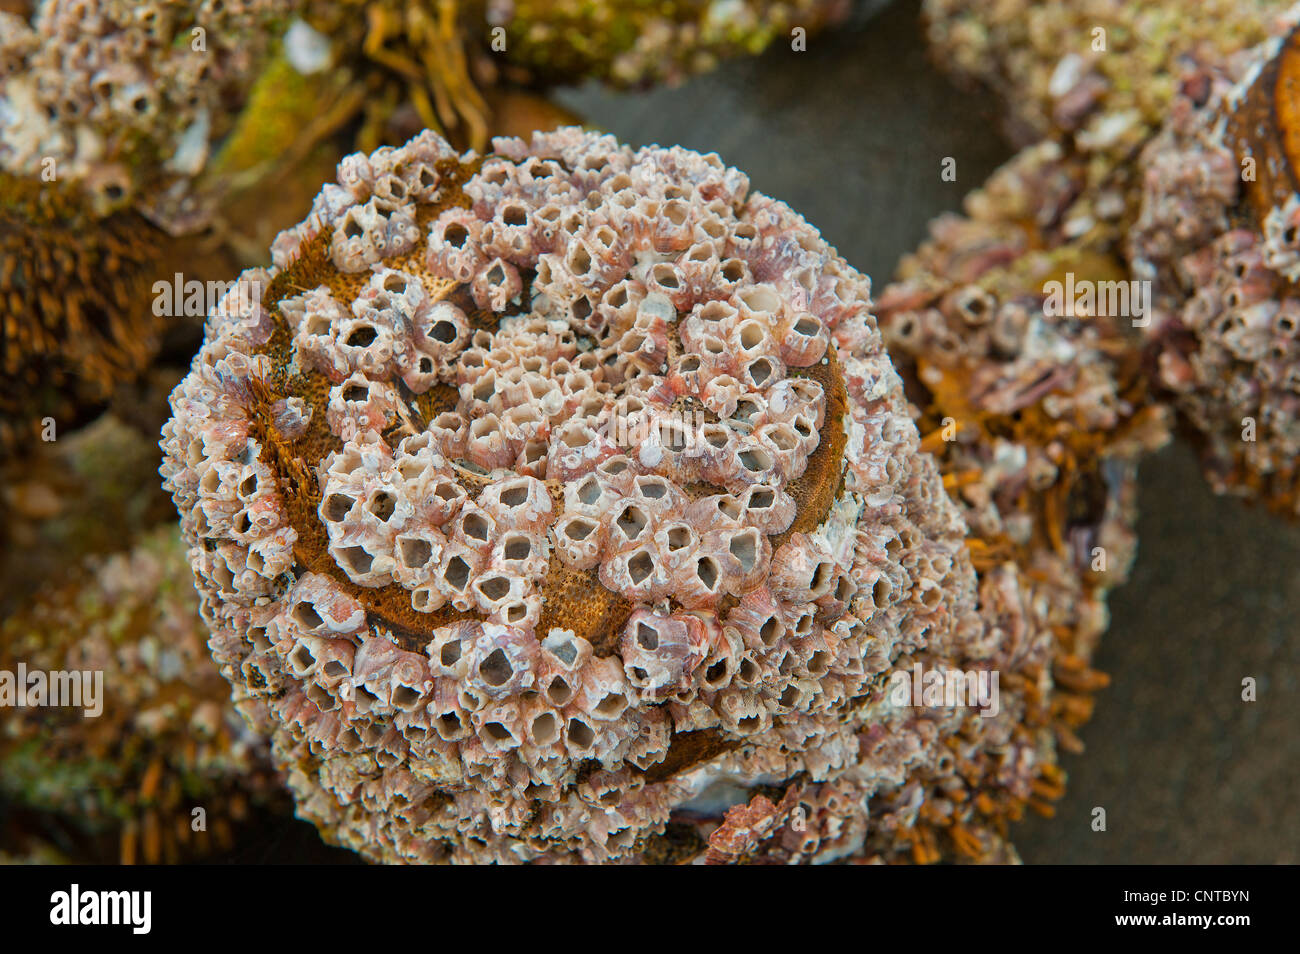 seapox sea pox BARNACLE Crustacean Balanidae sitting on a wooden branch Stock Photo